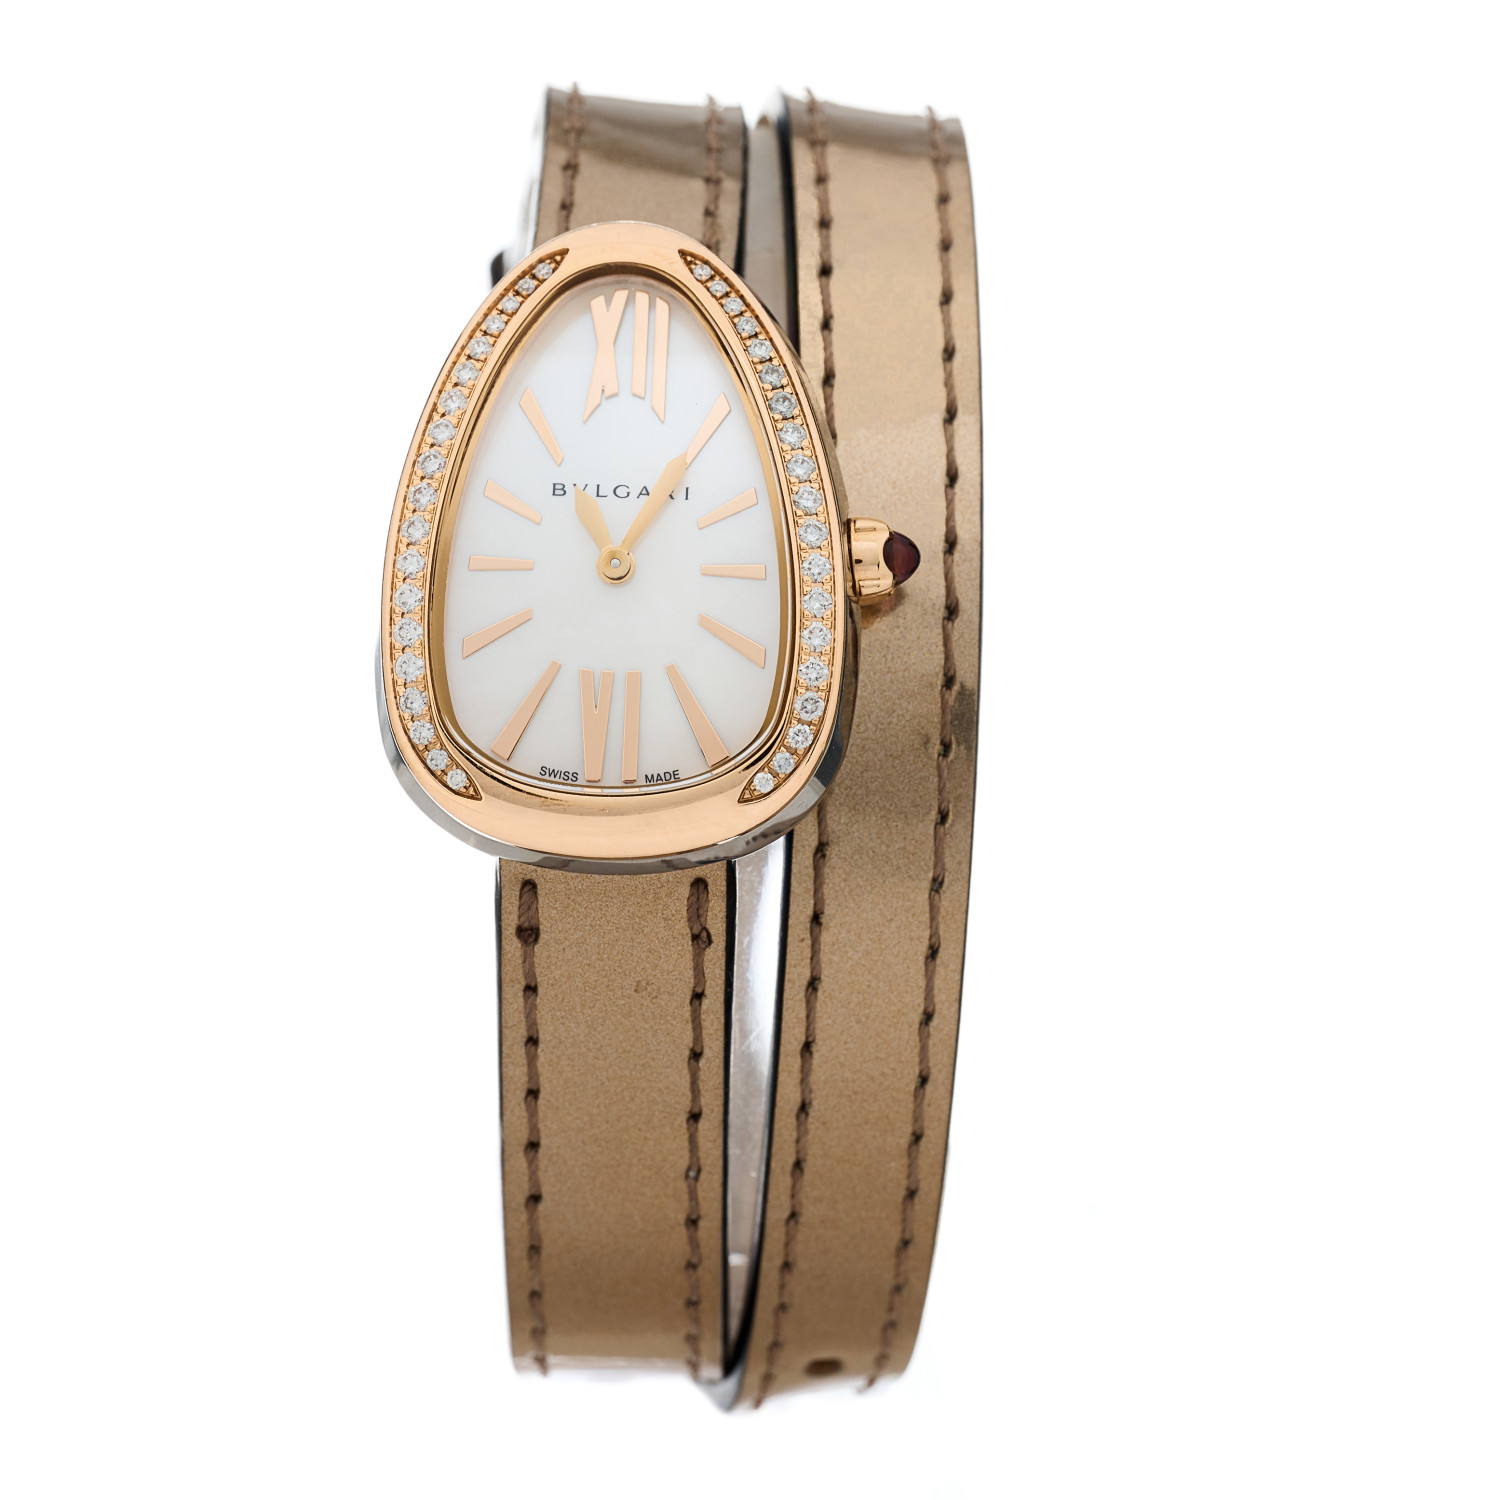 BULGARI Stainless Steel 18K Rose Gold Patent Diamond Bezel Mother of Pearl 20mm Serpenti Double Wrap Quartz Watch in the color bronze by FASHIONPHILE